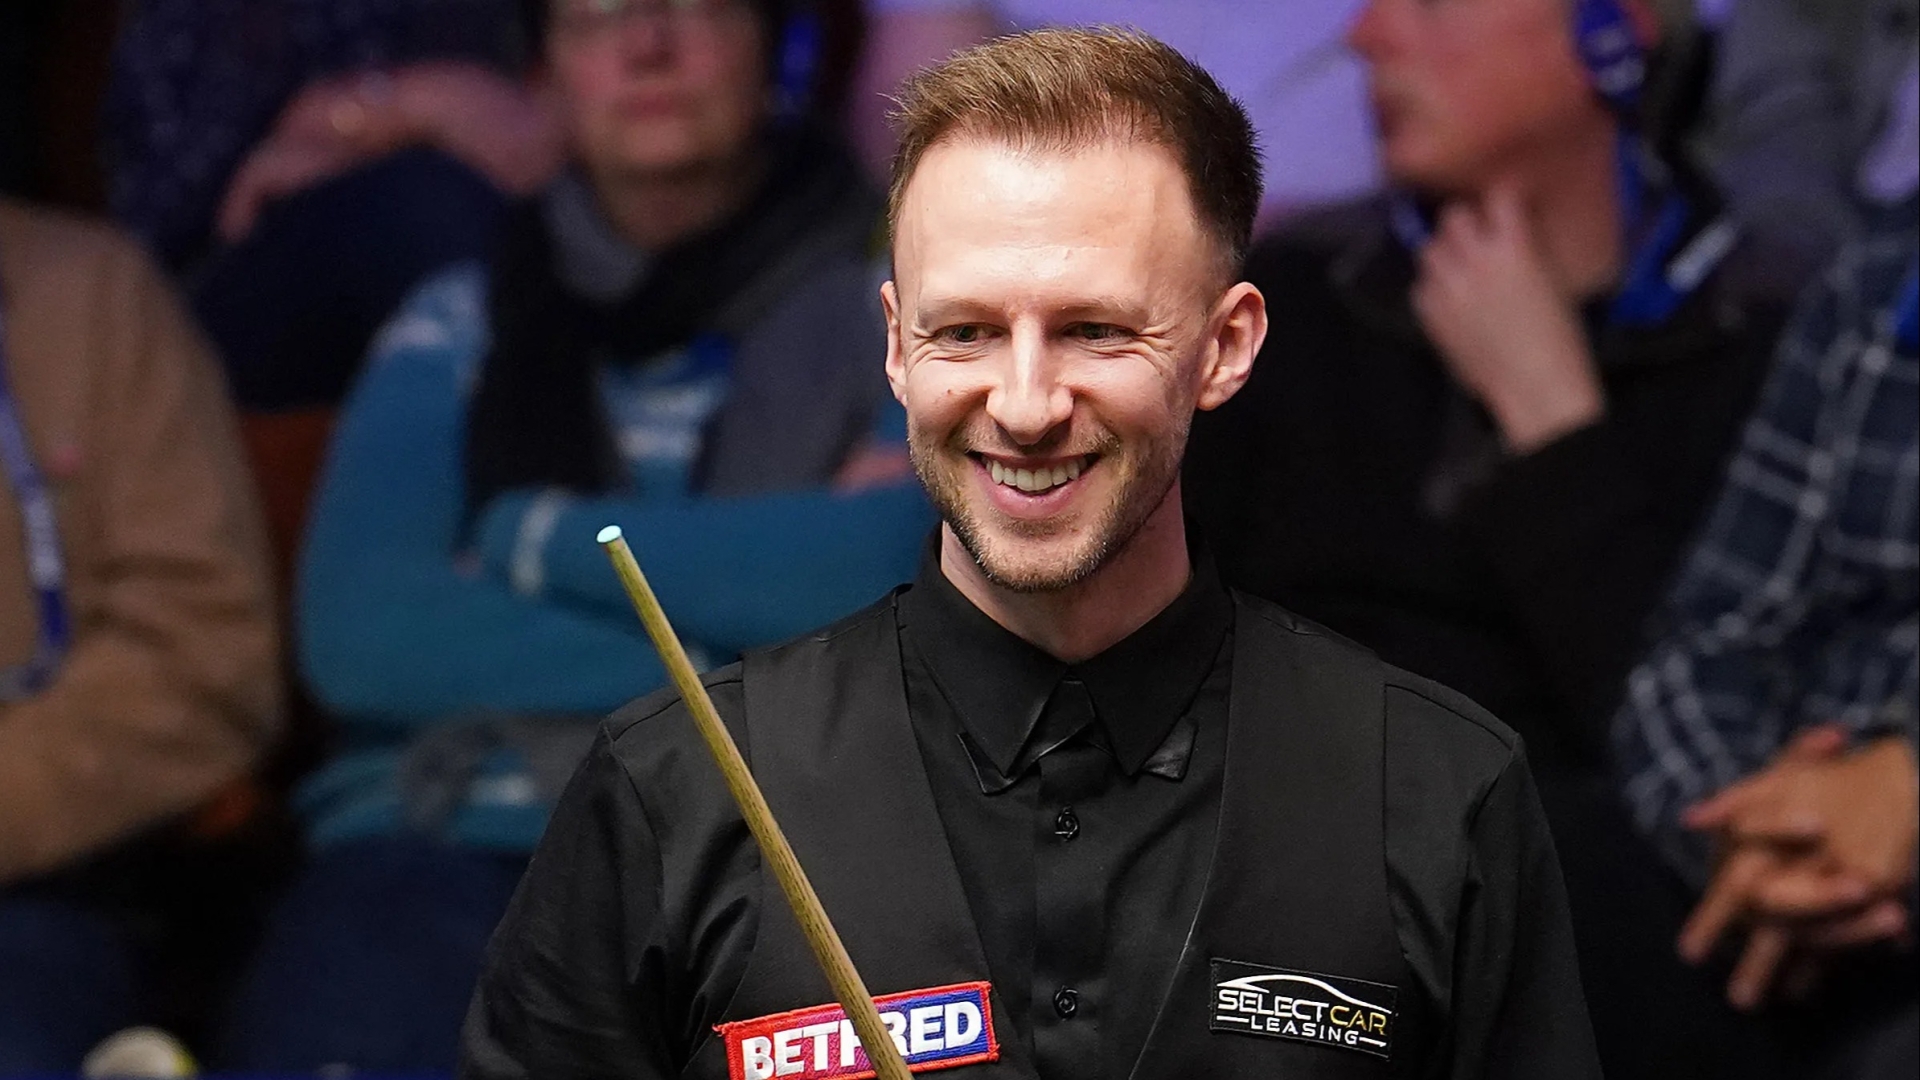 Watch hilarious moment Judd Trump tricks referee to sneakily MOVE ball after snookering himself at World Championship